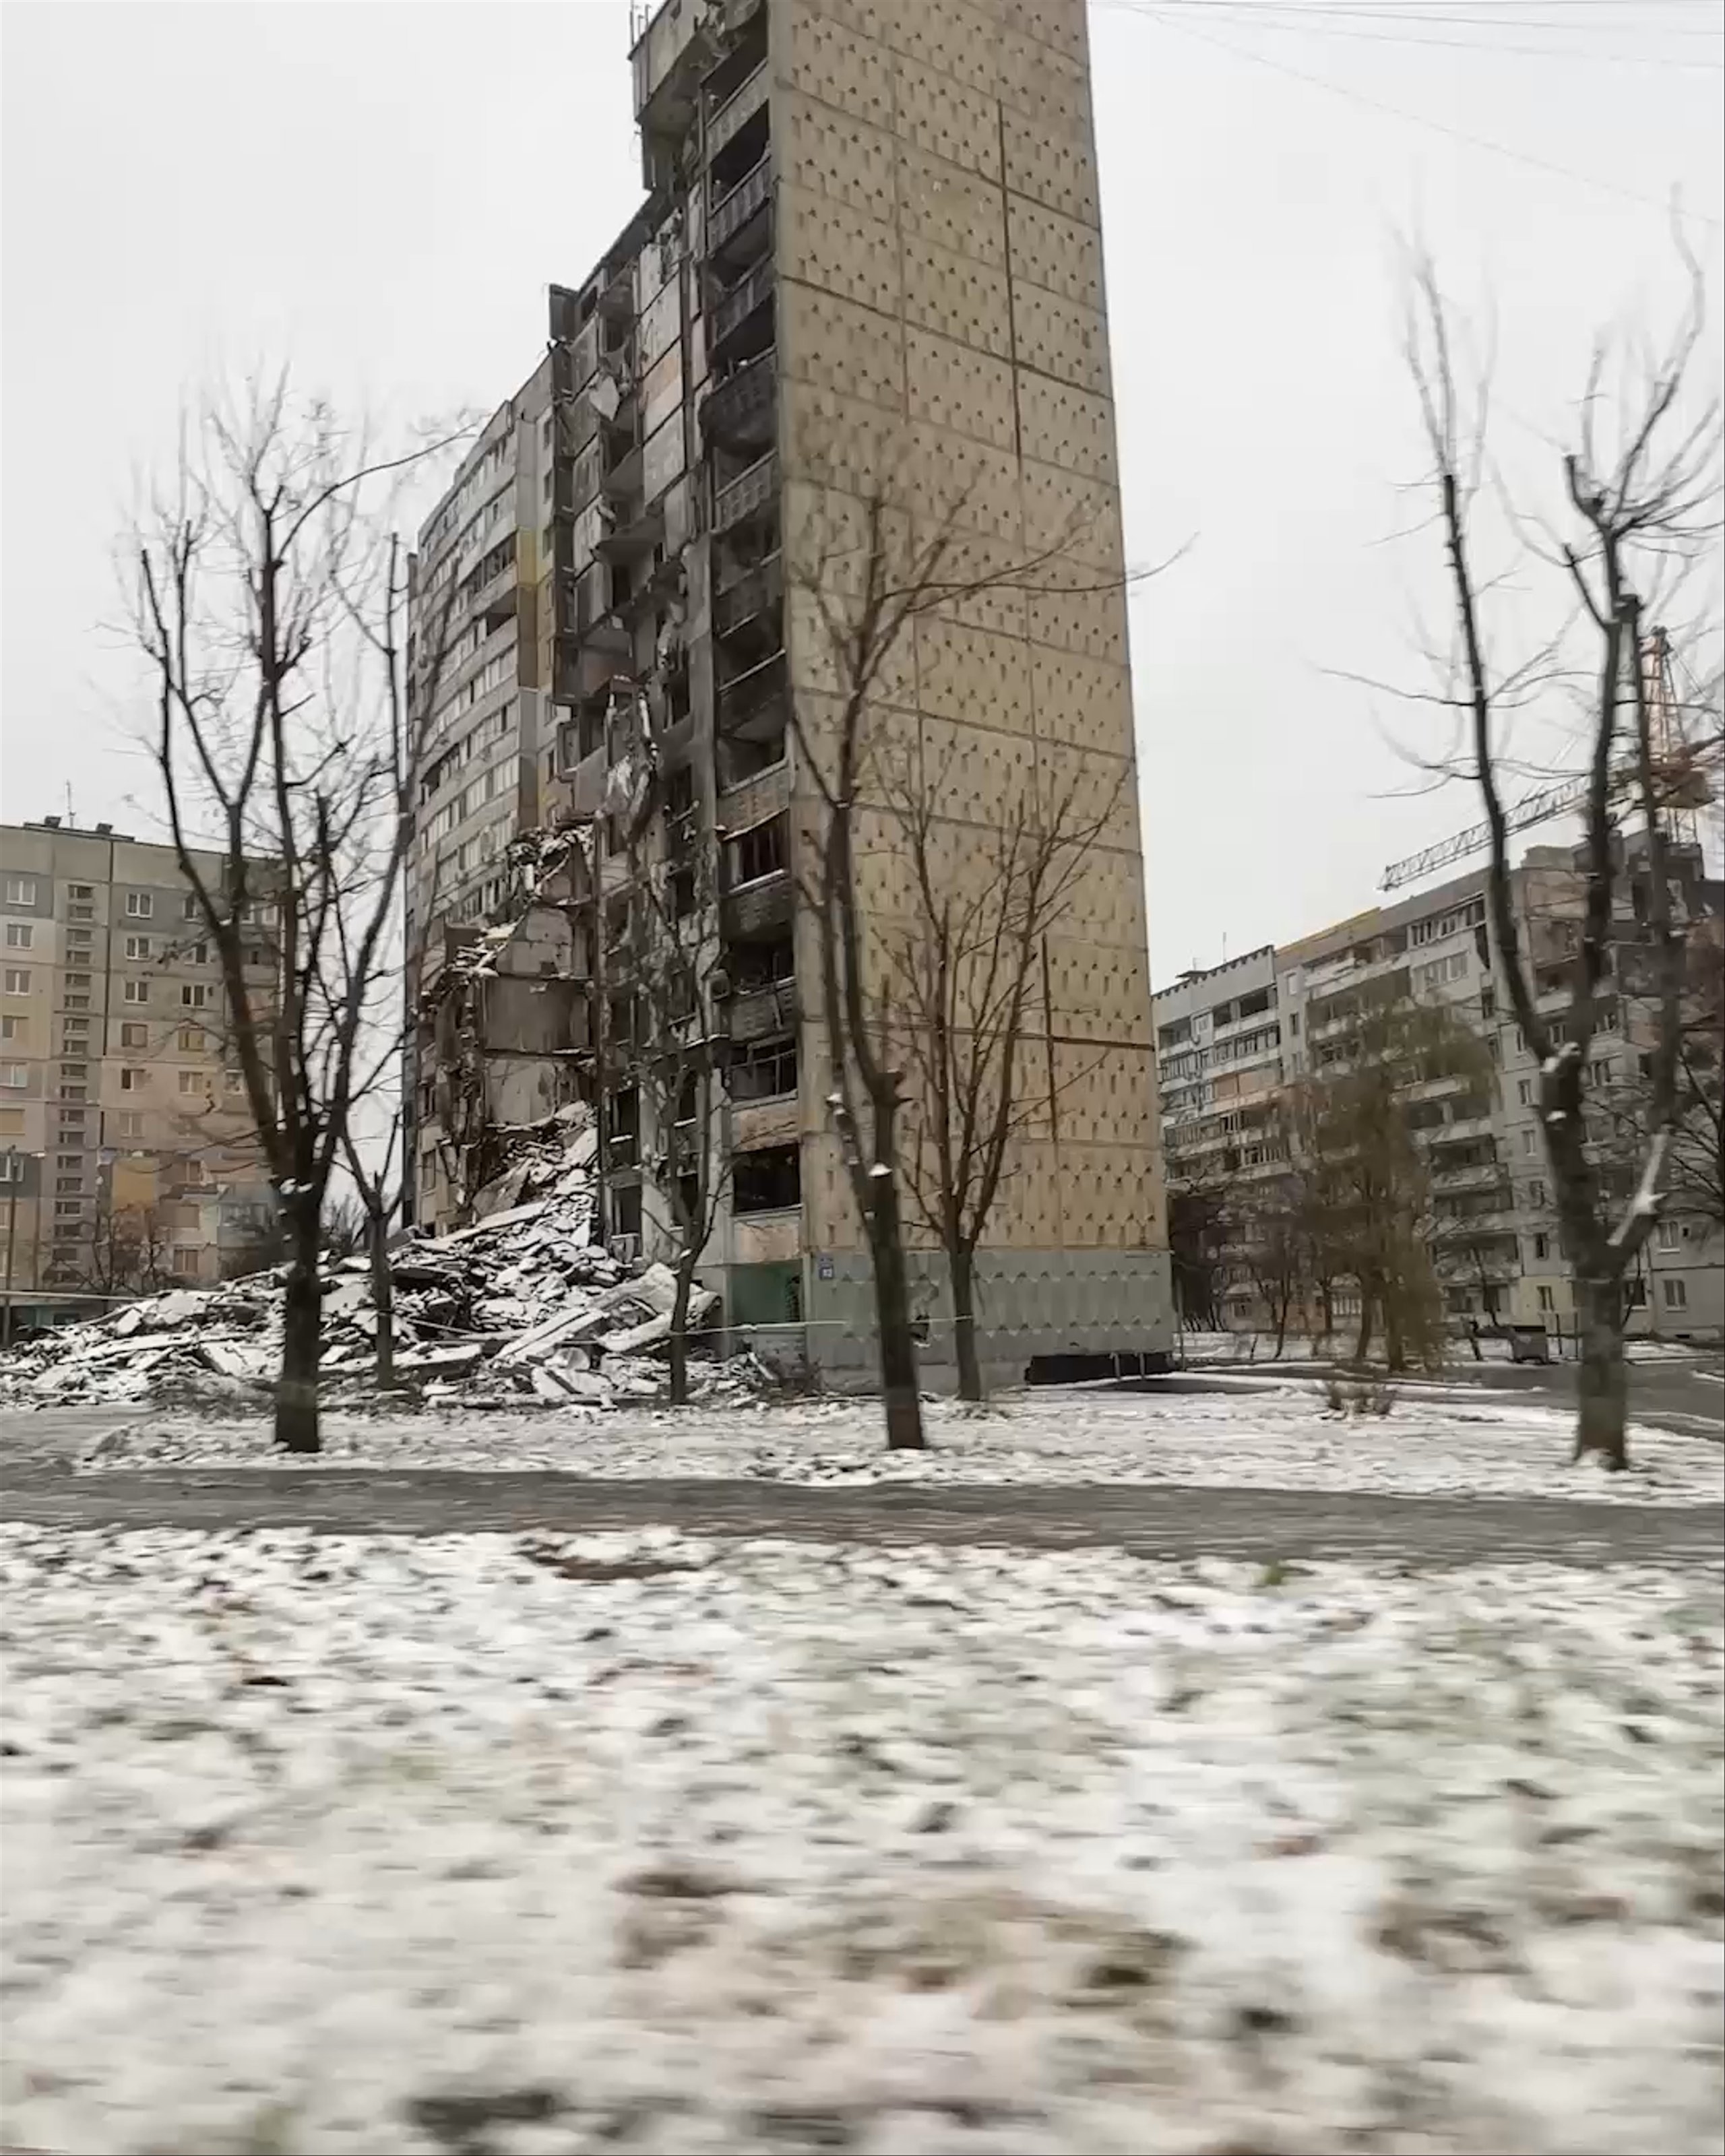 Video from volunteer truck showing destroyed apartment buildings